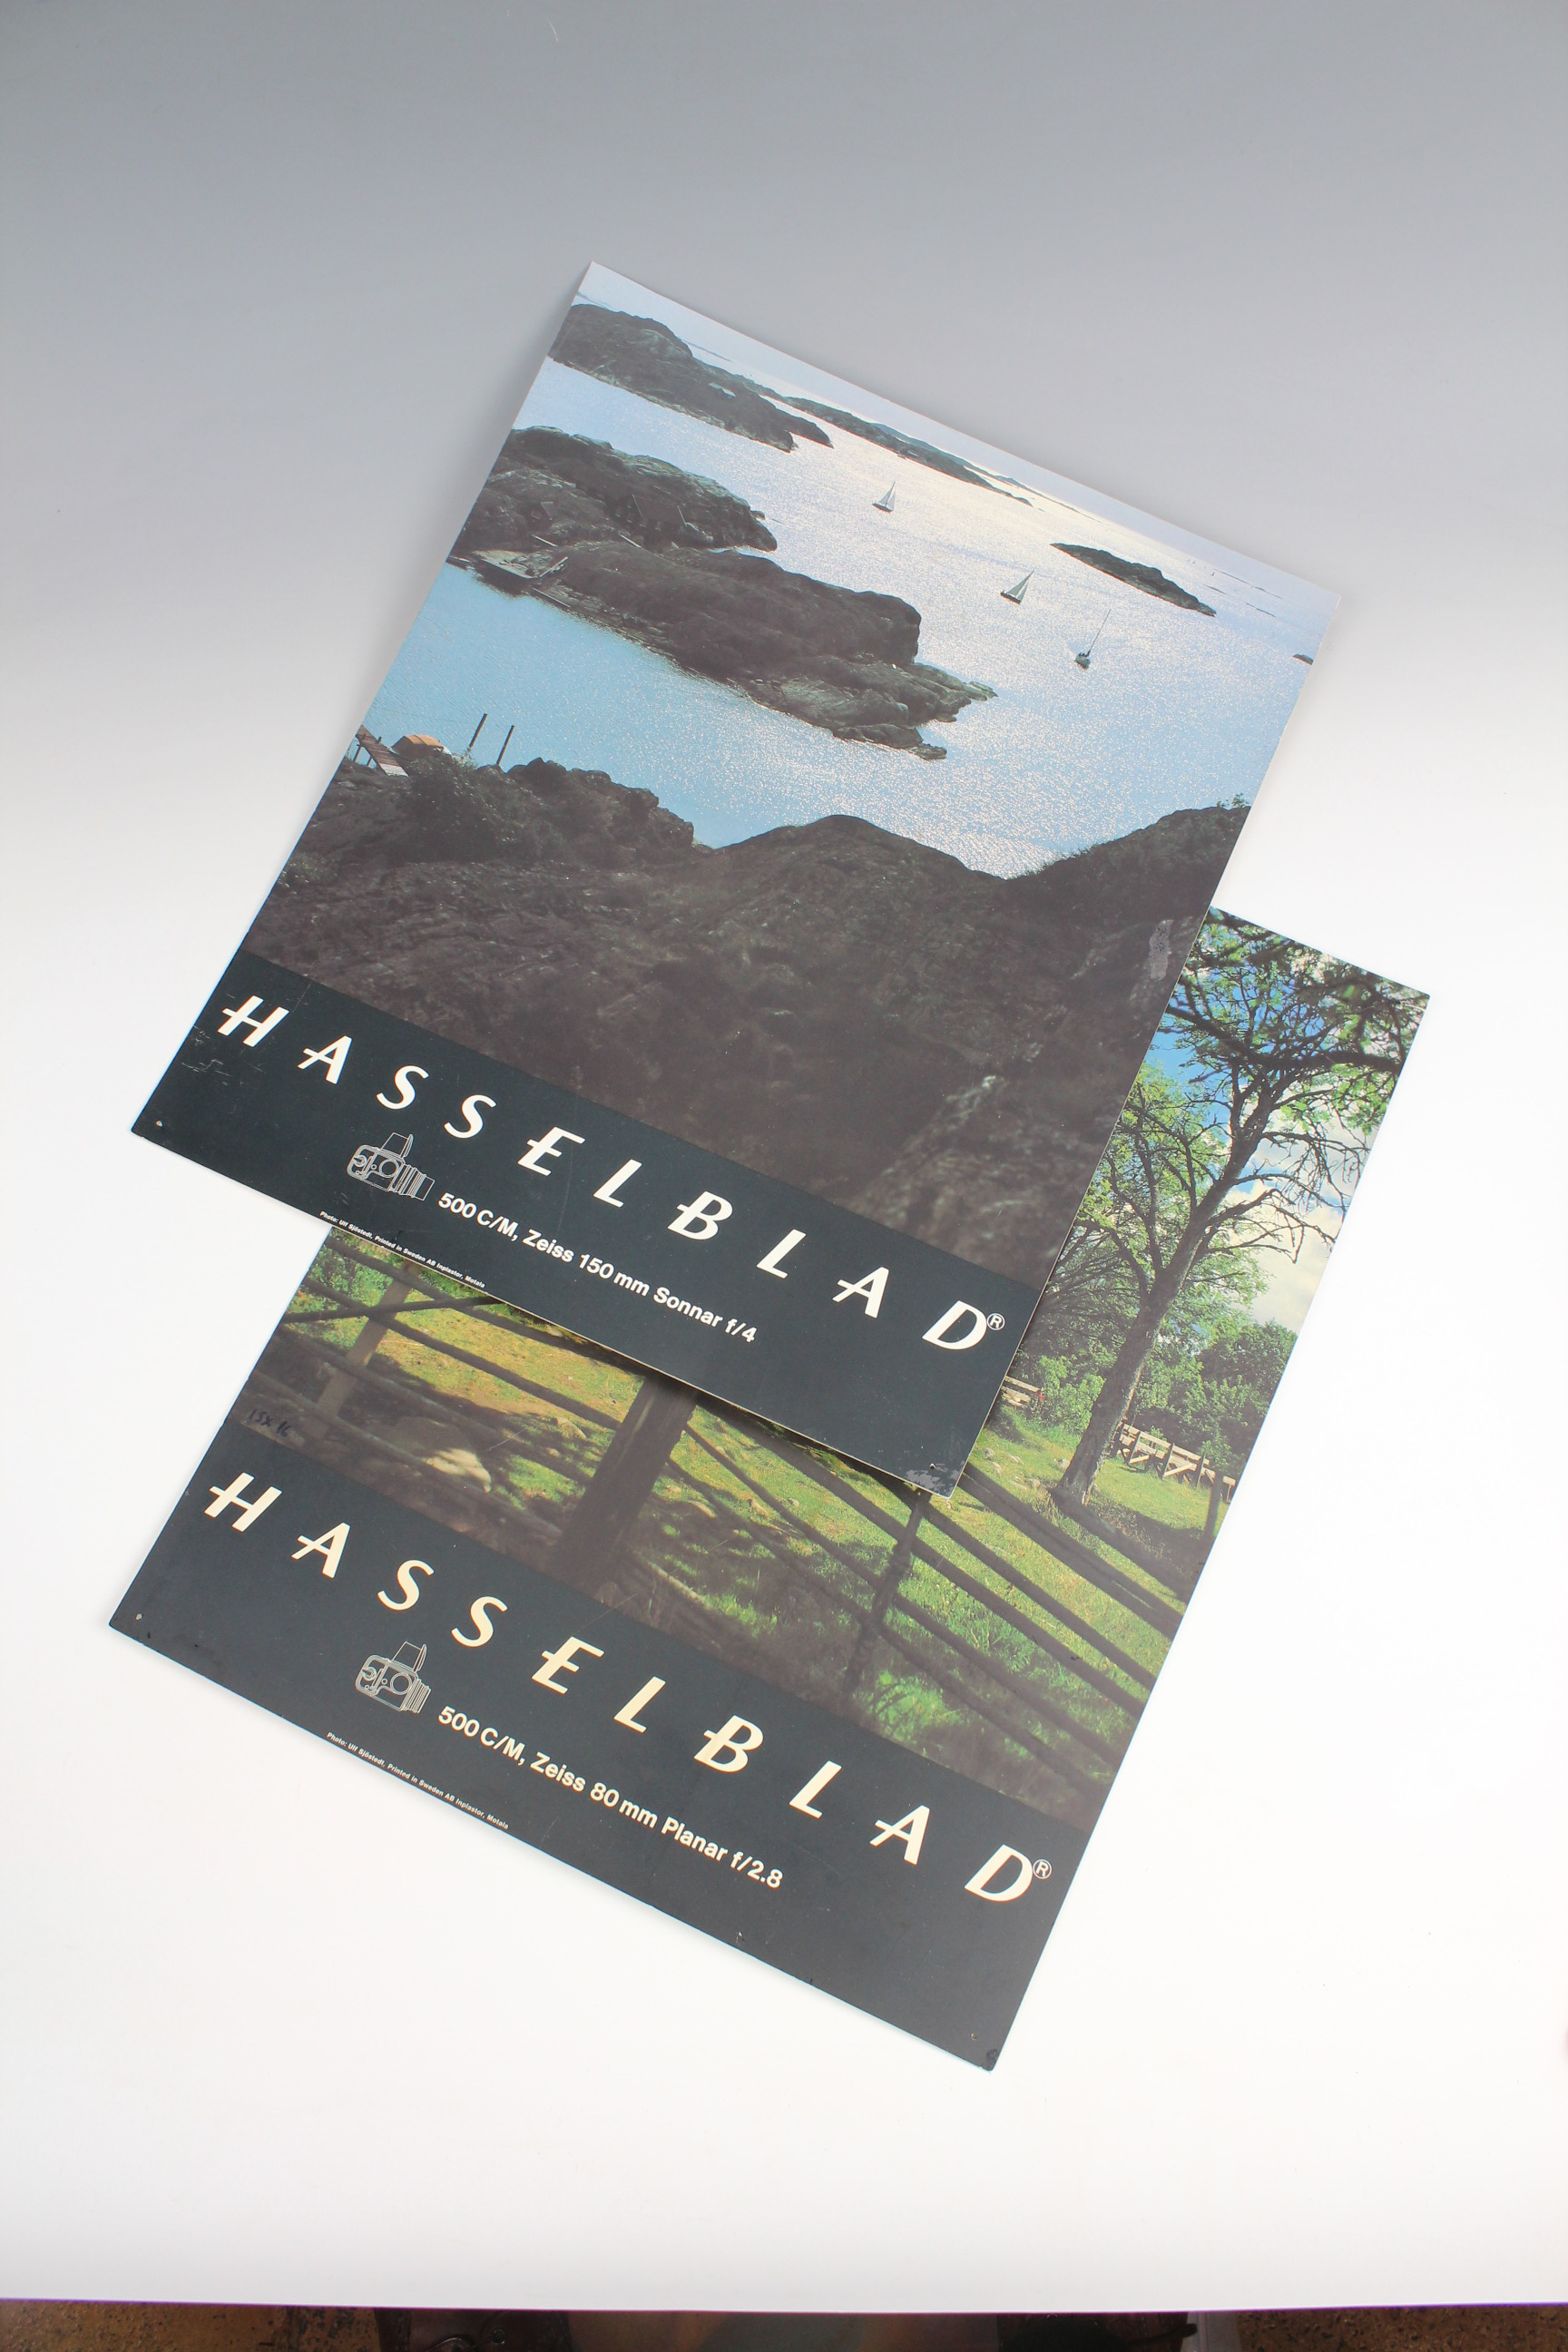 Vintage official Hasselblad promotional posters (printed on plastic), a calendar and desk pad